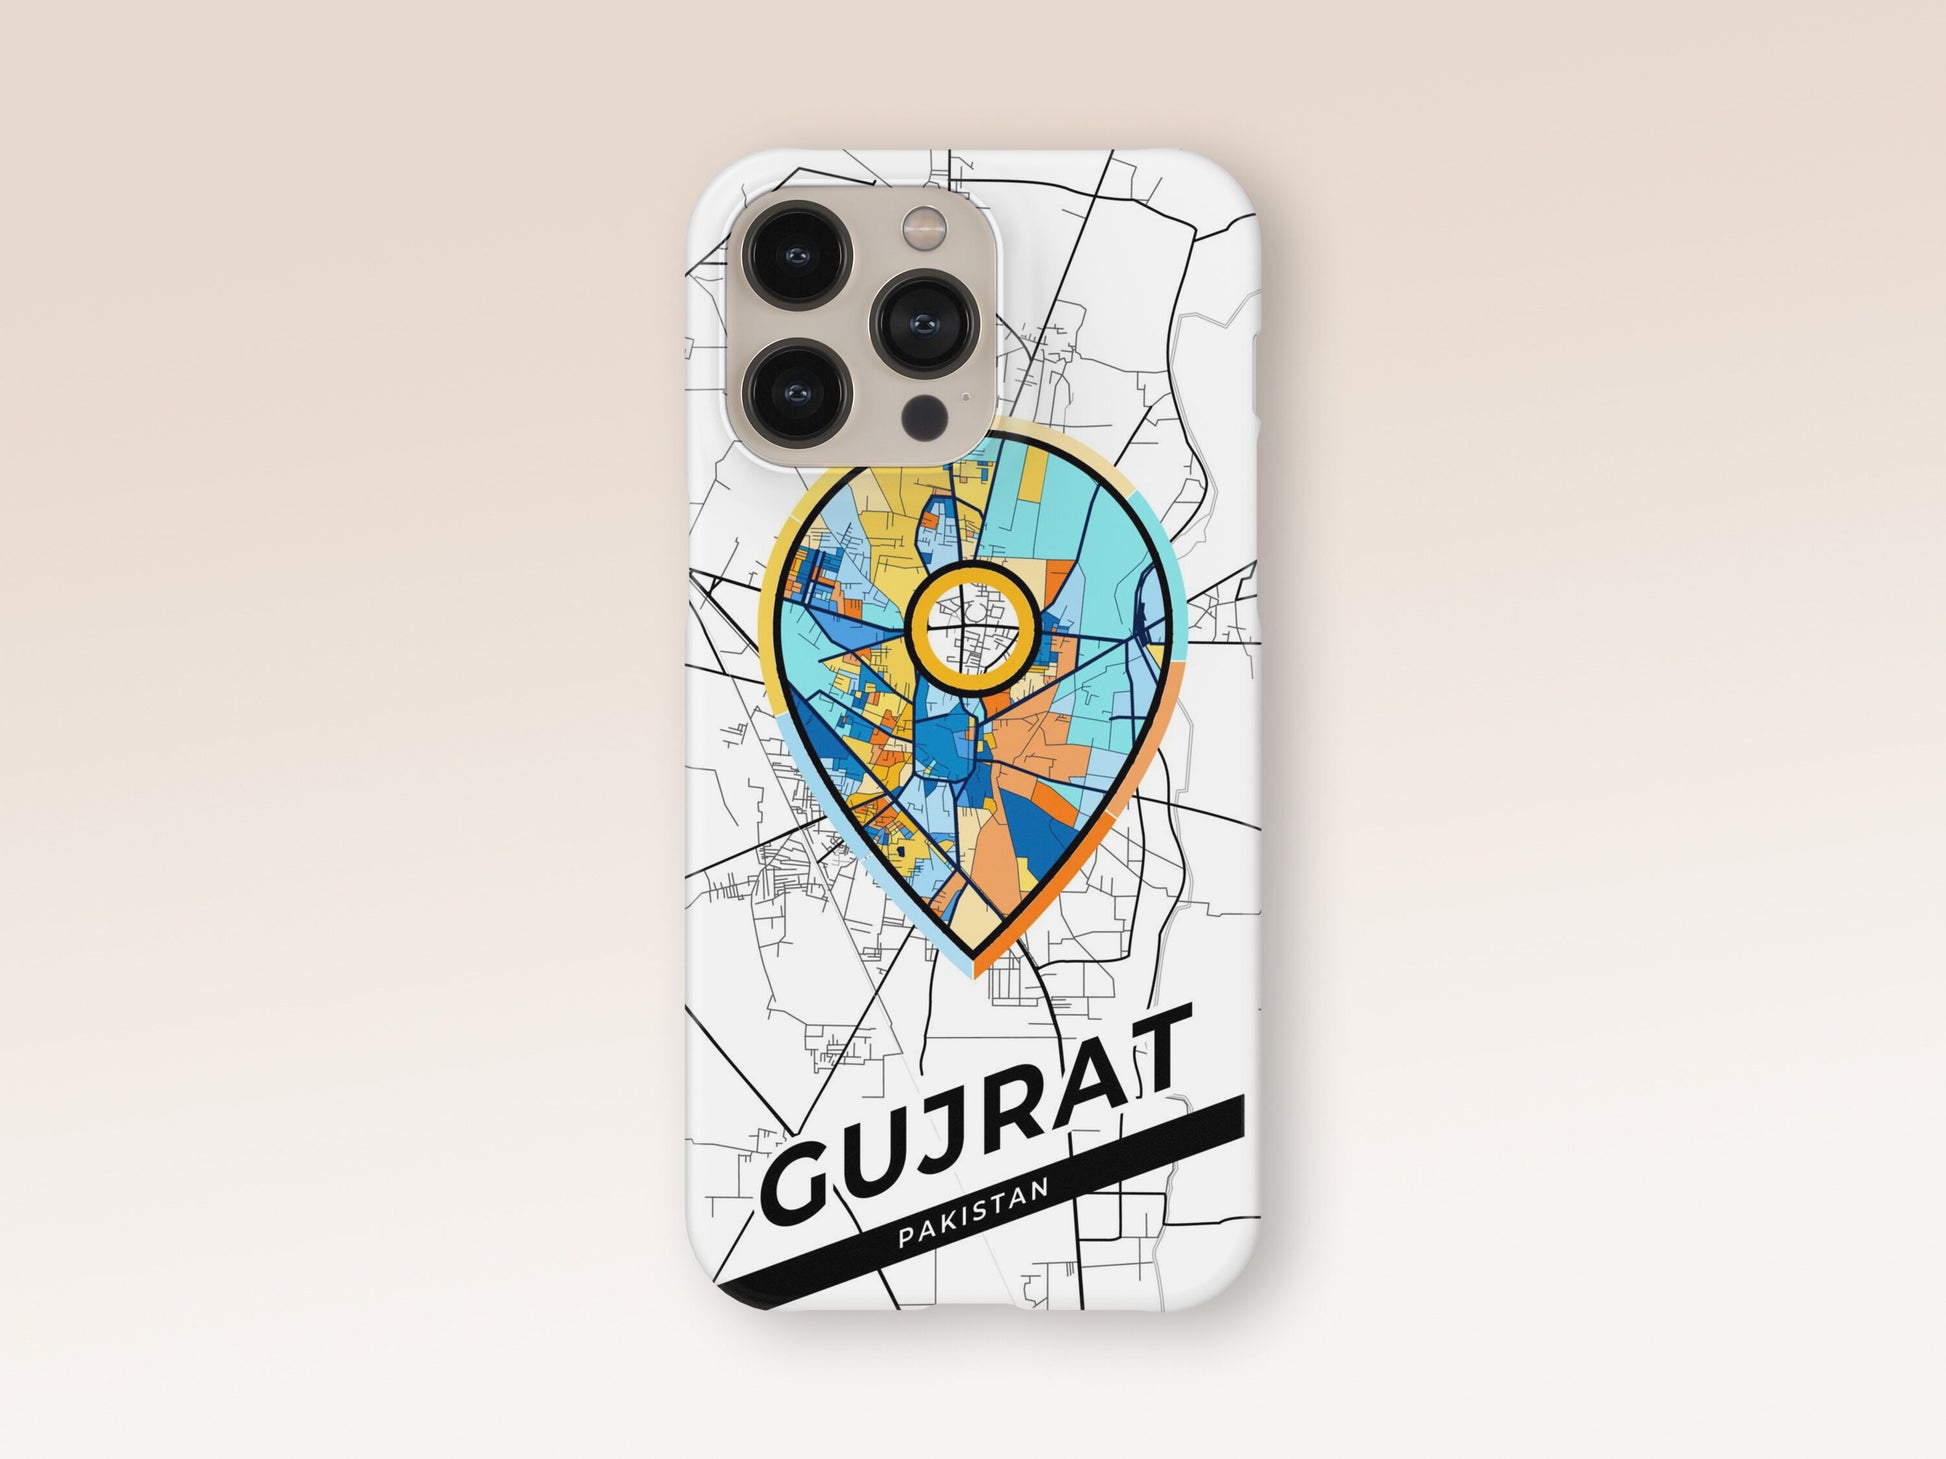 Gujrat Pakistan slim phone case with colorful icon. Birthday, wedding or housewarming gift. Couple match cases. 1